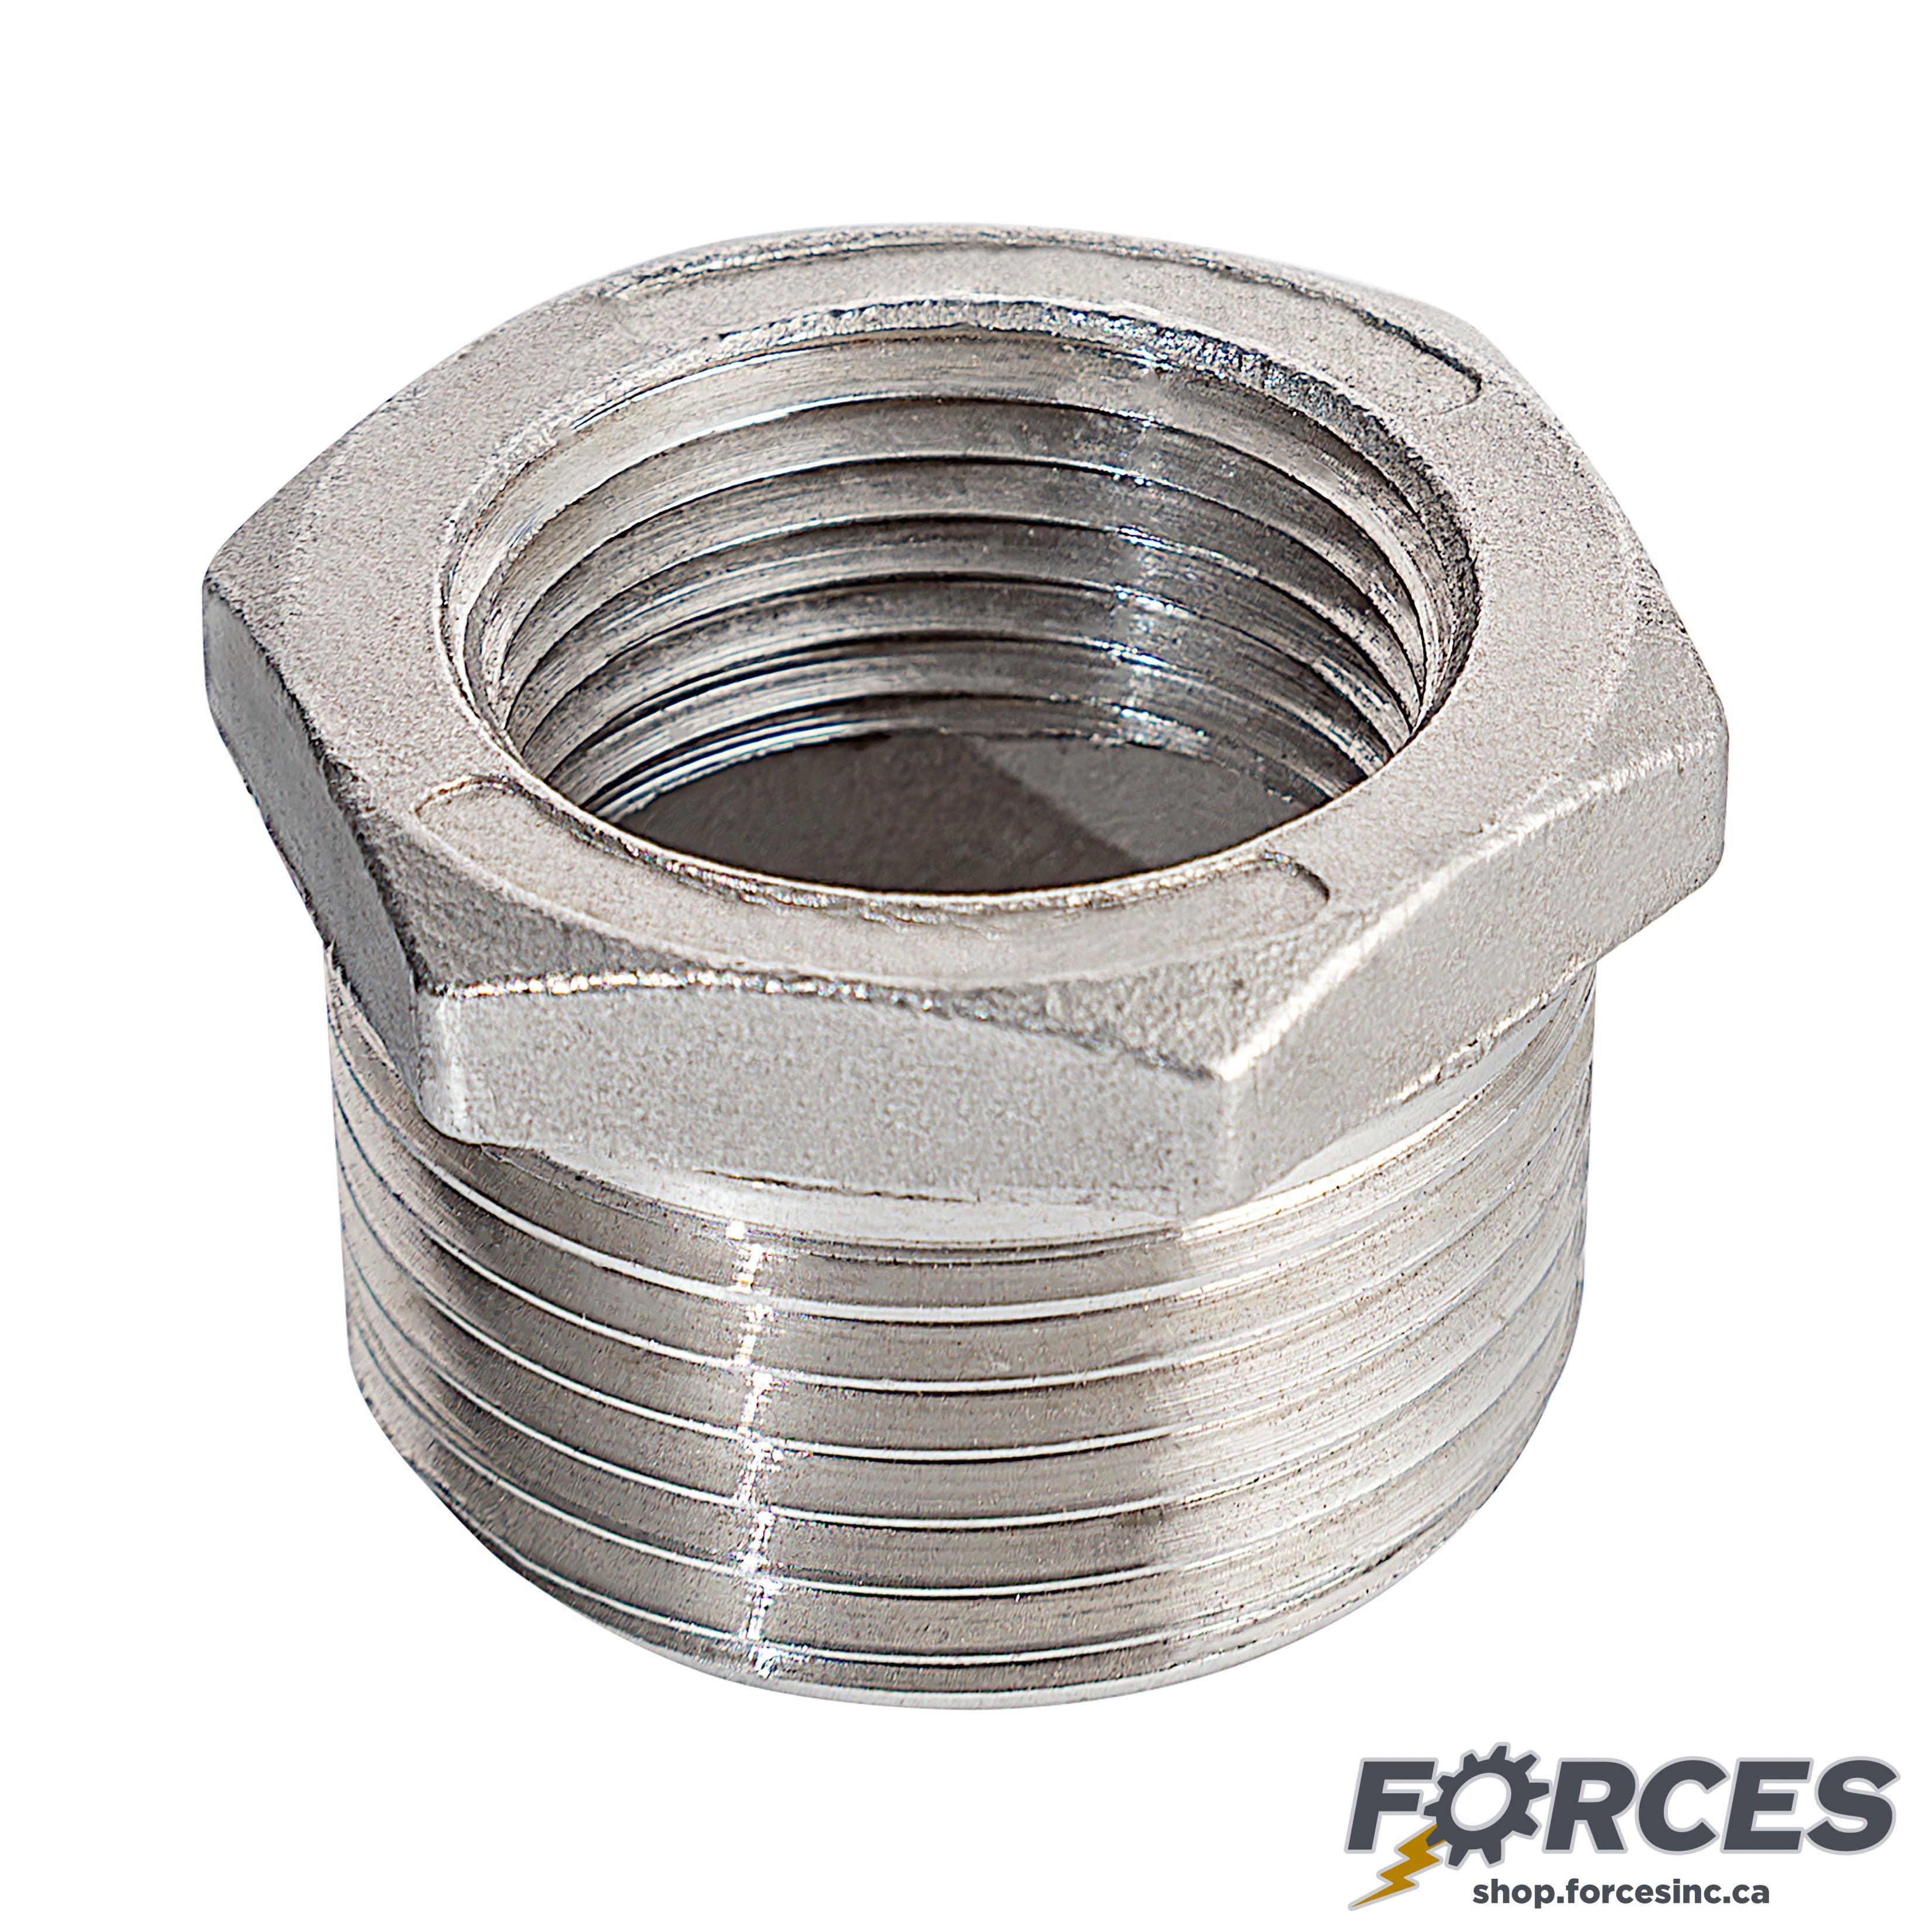 2" (M) x 1" (F) Reducing Hex Bushing NPT #150 - Stainless Steel 316 - Forces Inc